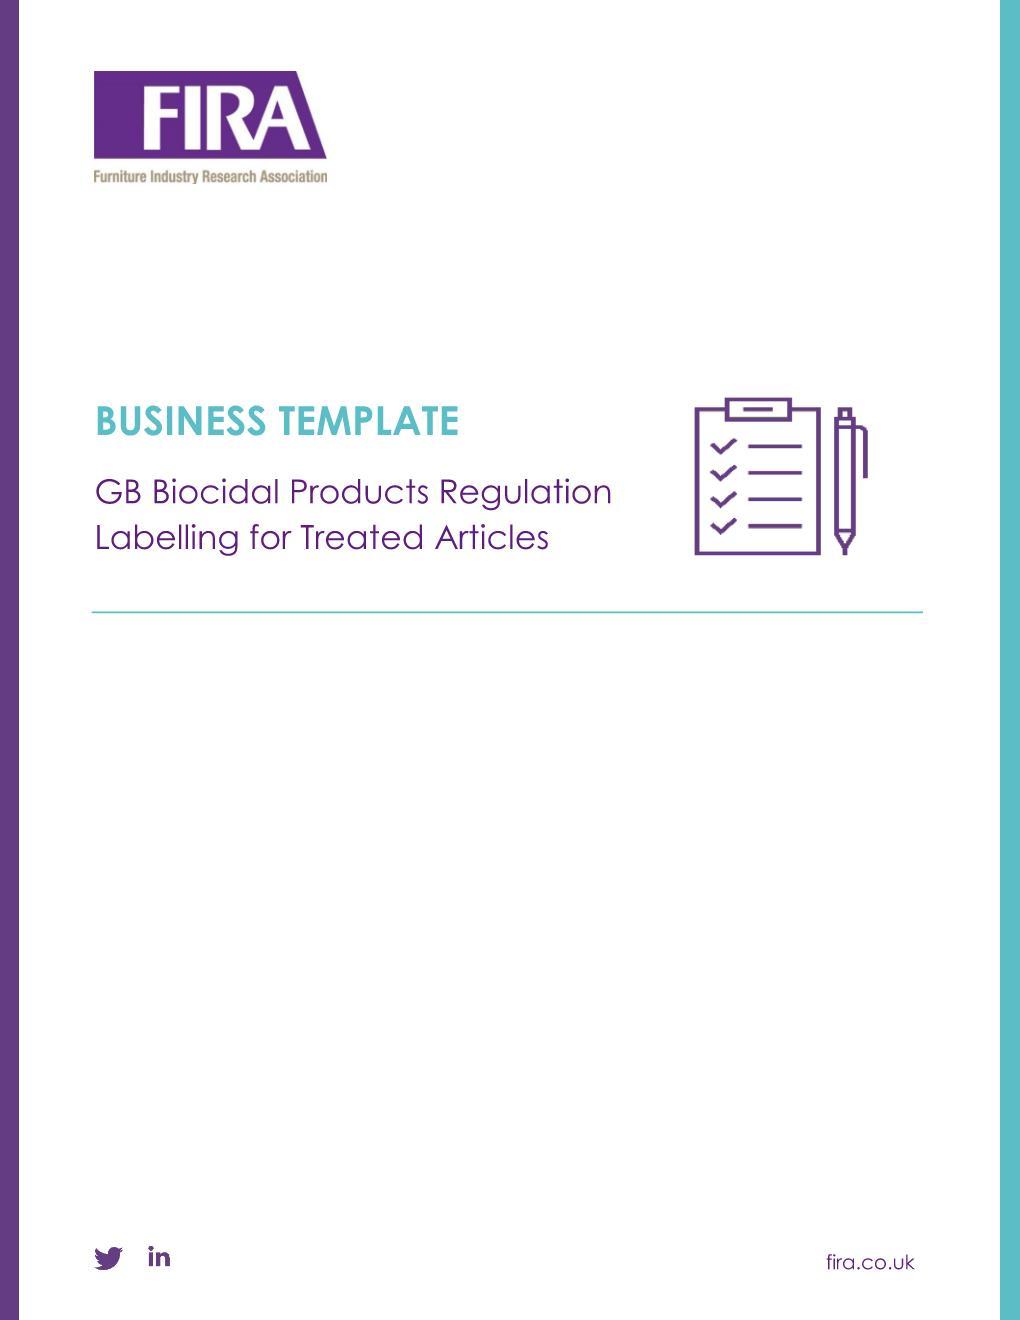 GB Biocidal Products Regulation - Labelling Treated Articles Template